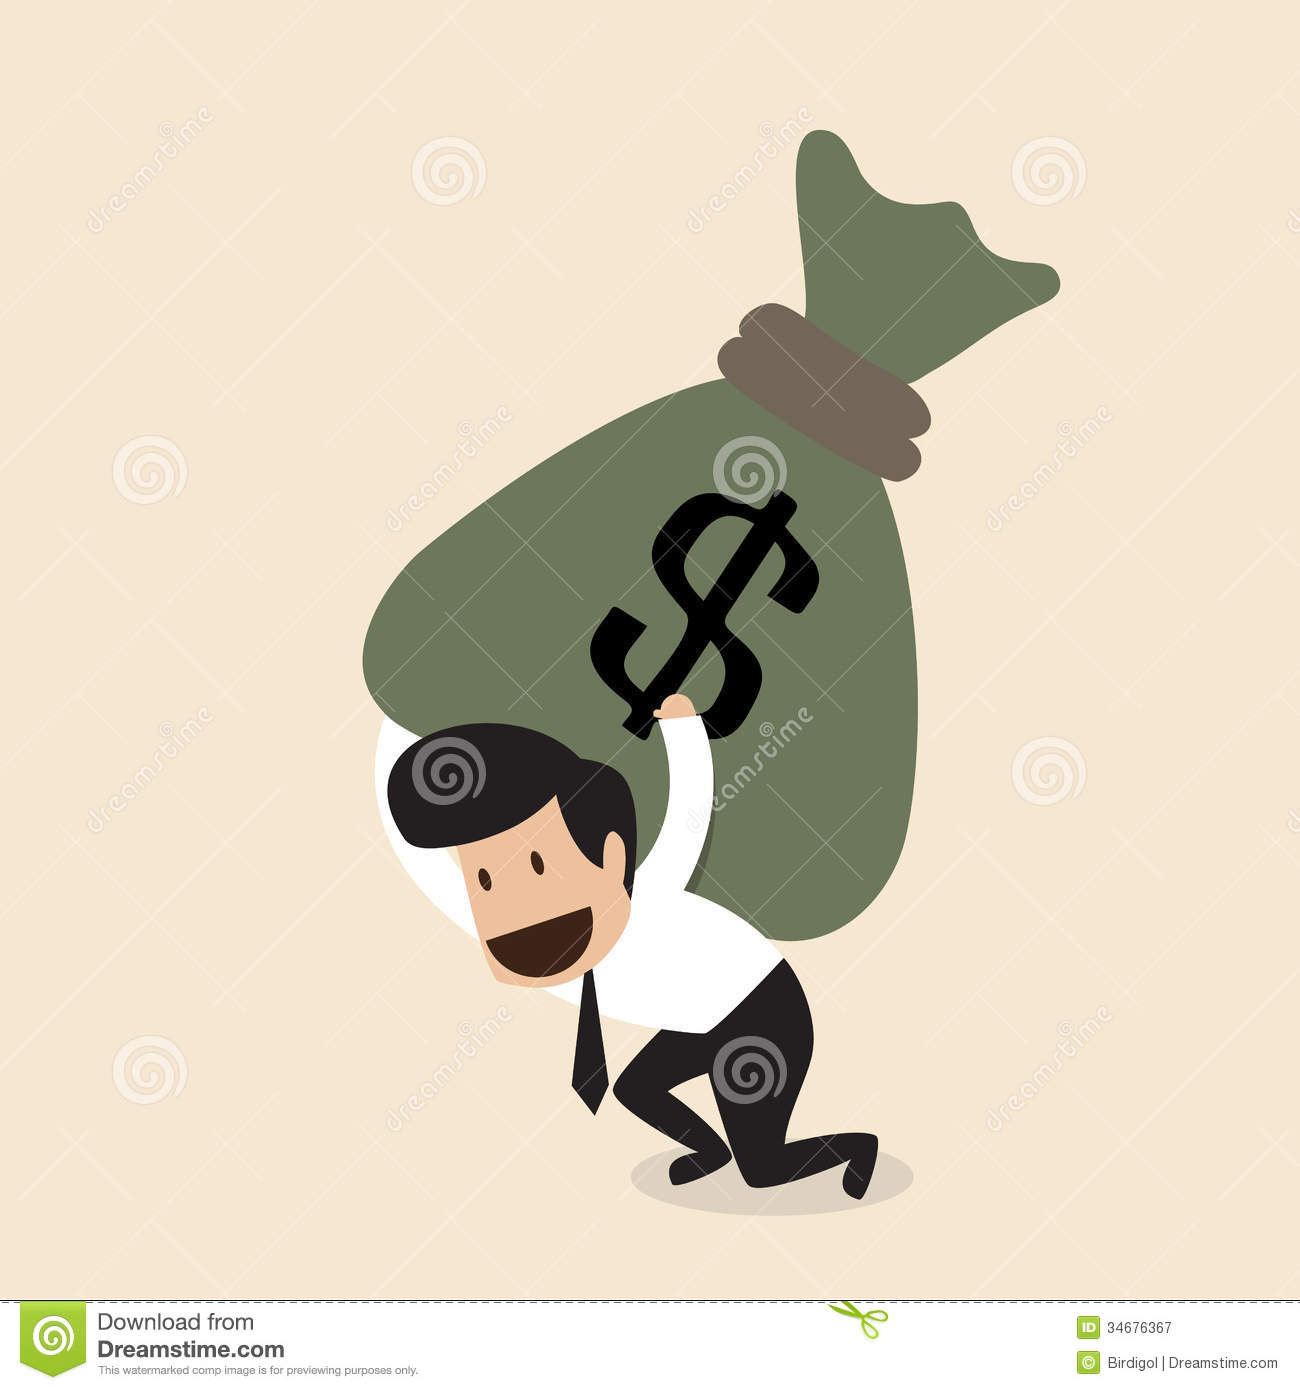 Businessman Carry Huge Money Bag Royalty Free Stock Photography    